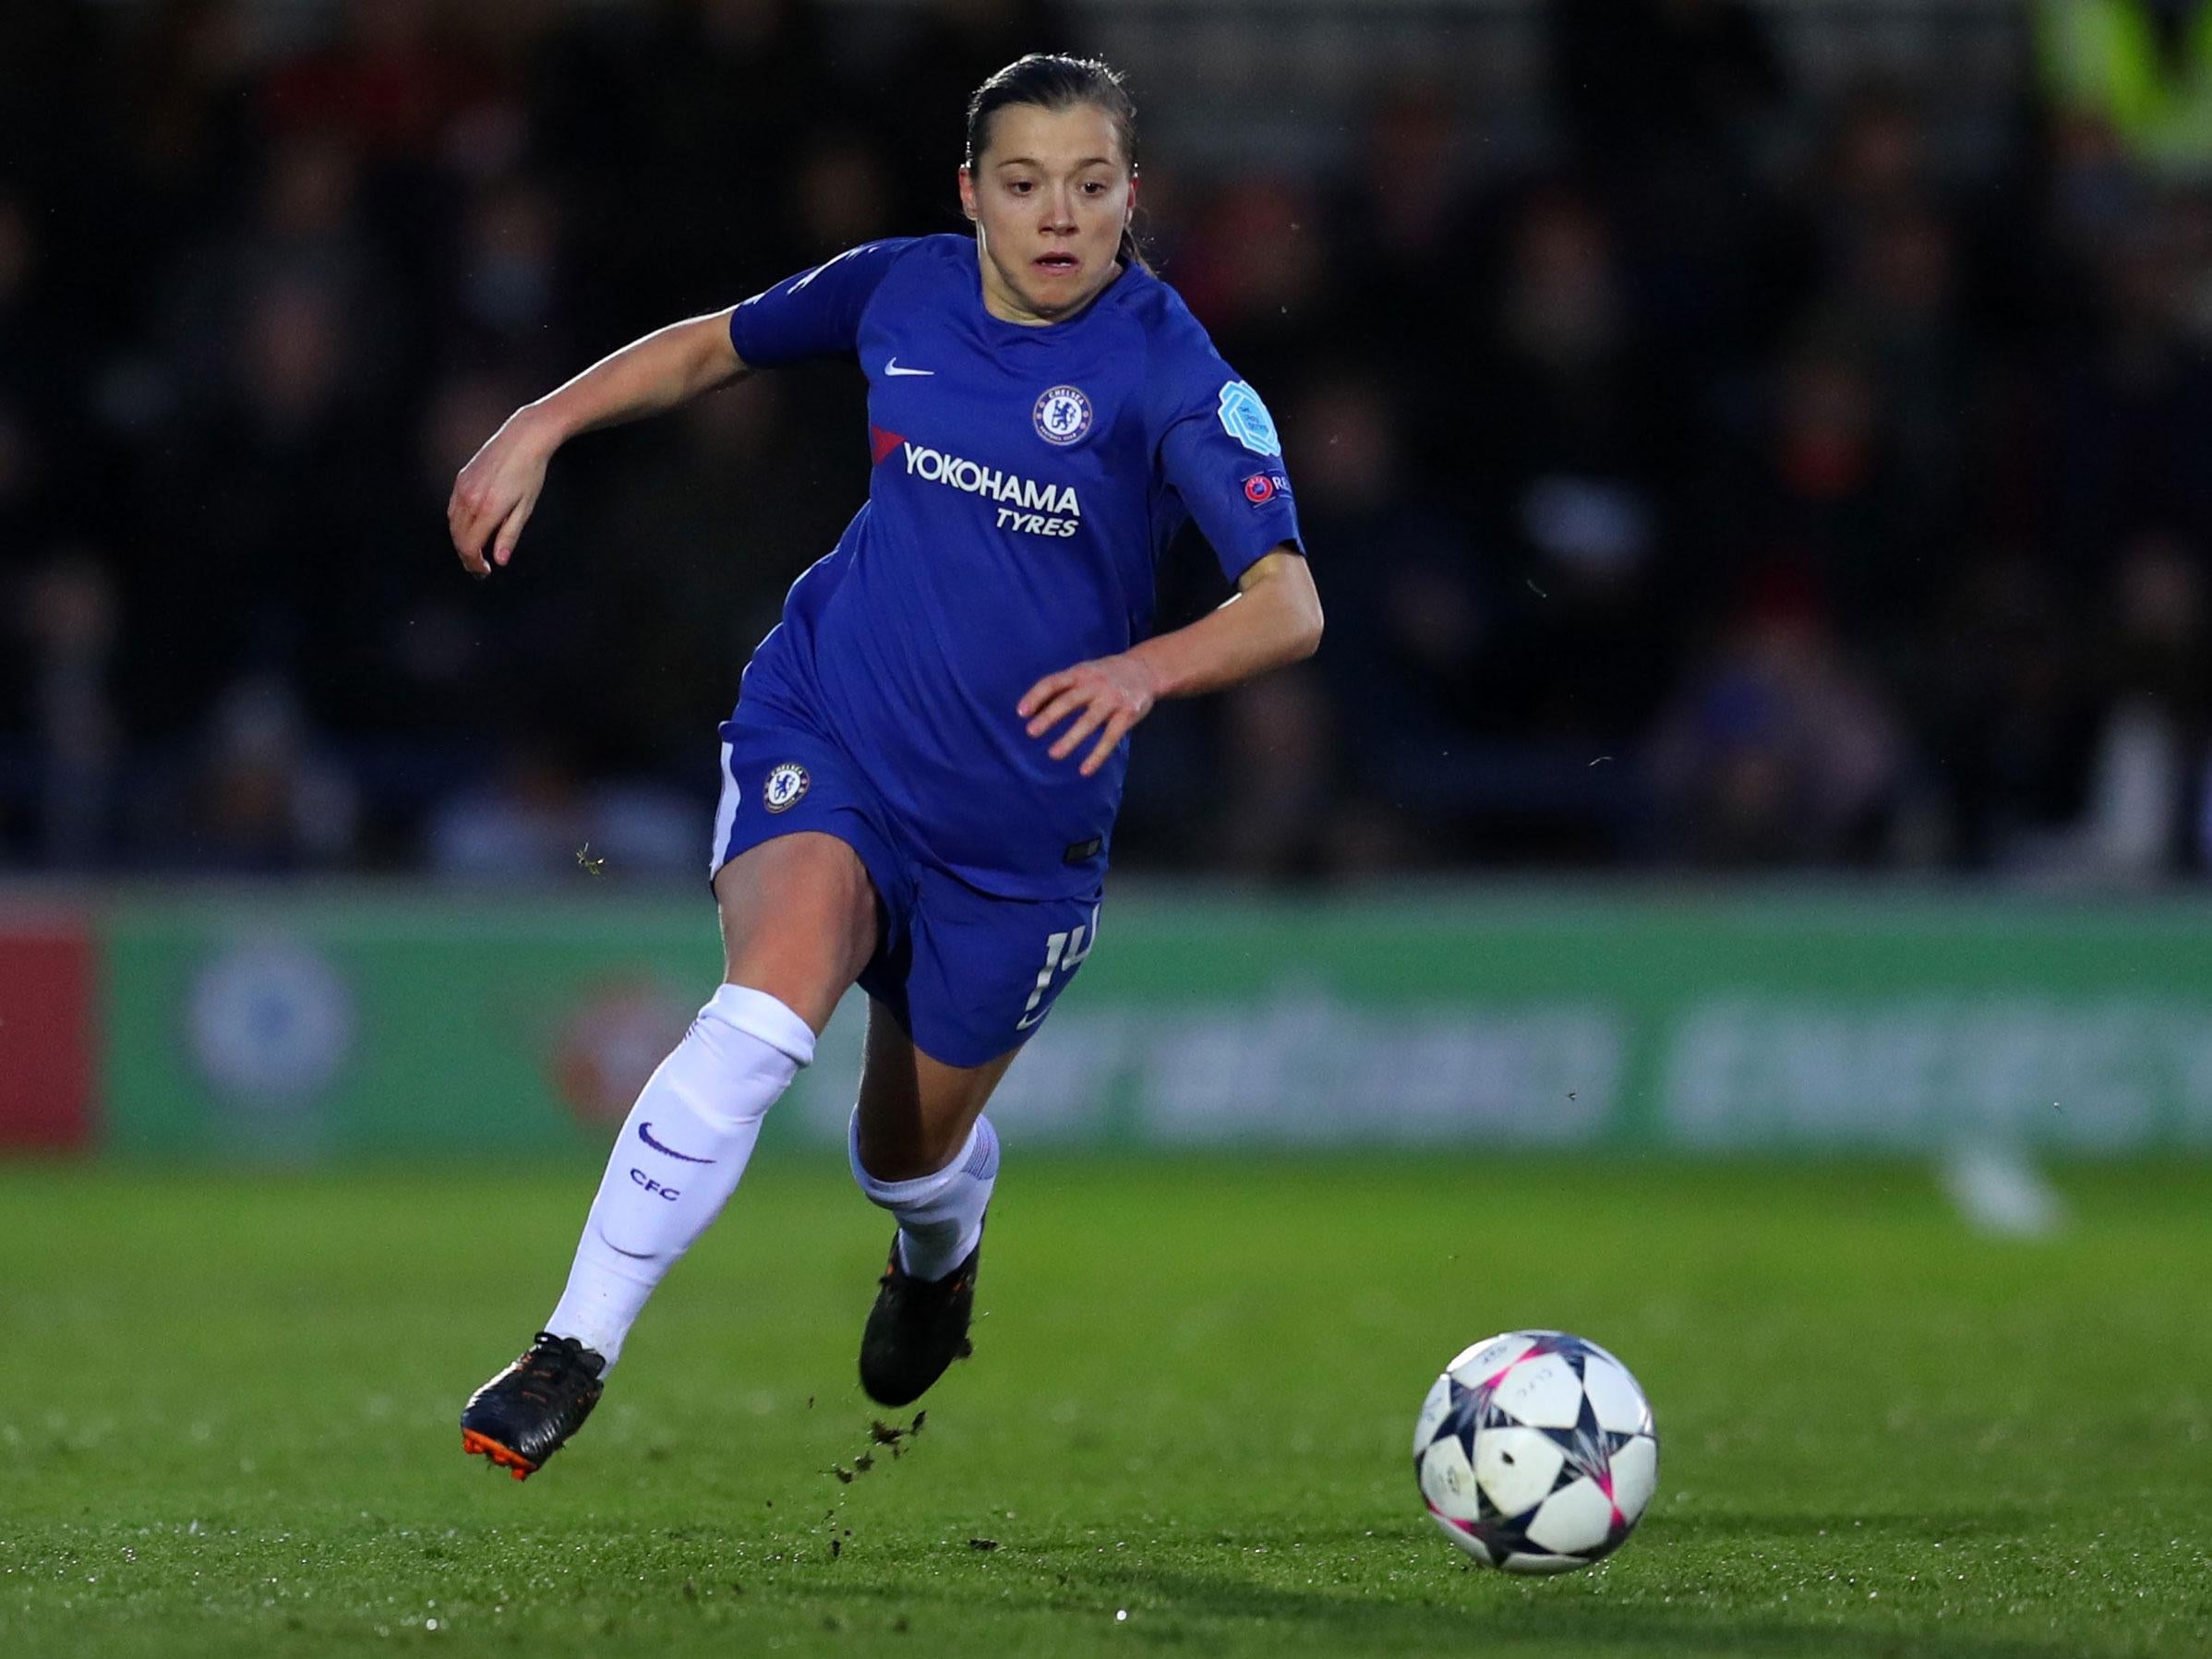 Fran Kirby is one of England's best players